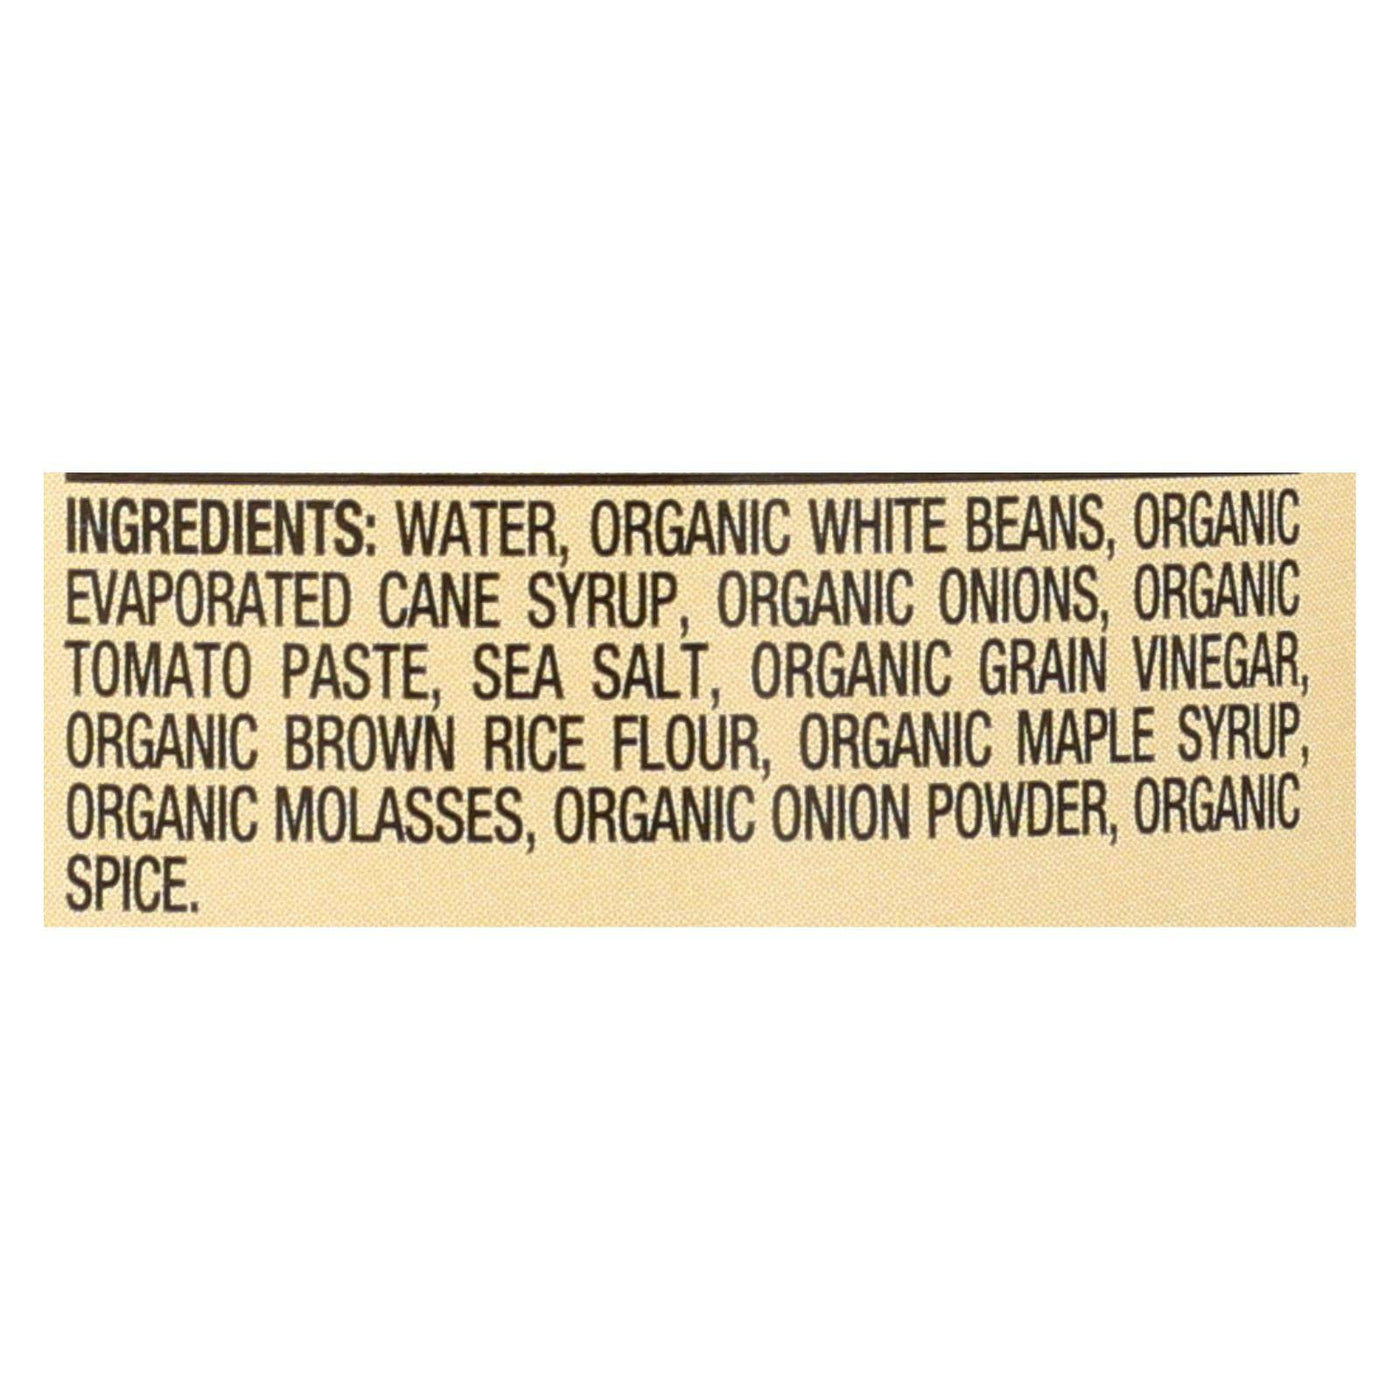 Walnut Acres Organic Baked Beans - Maple And Onion - Case Of 12 - 15 Oz. | OnlyNaturals.us